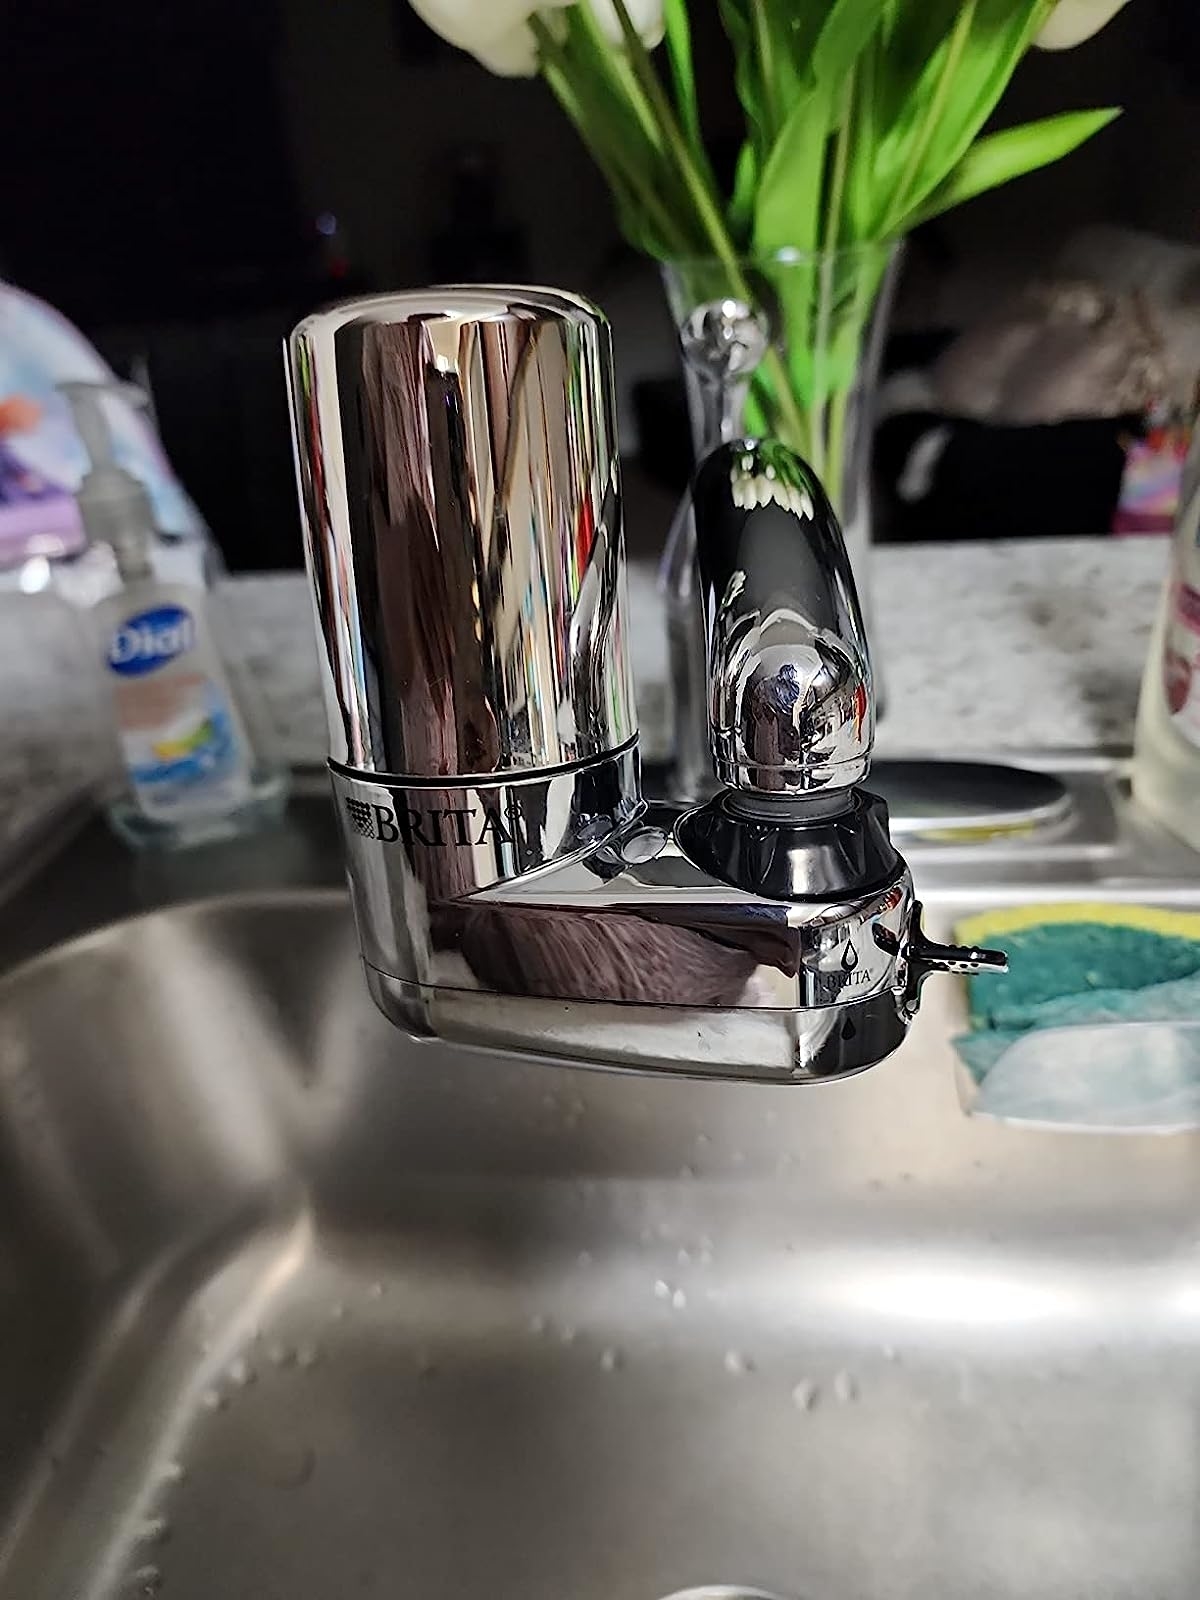 Reviewer image of the filter attached to their kitchen faucet